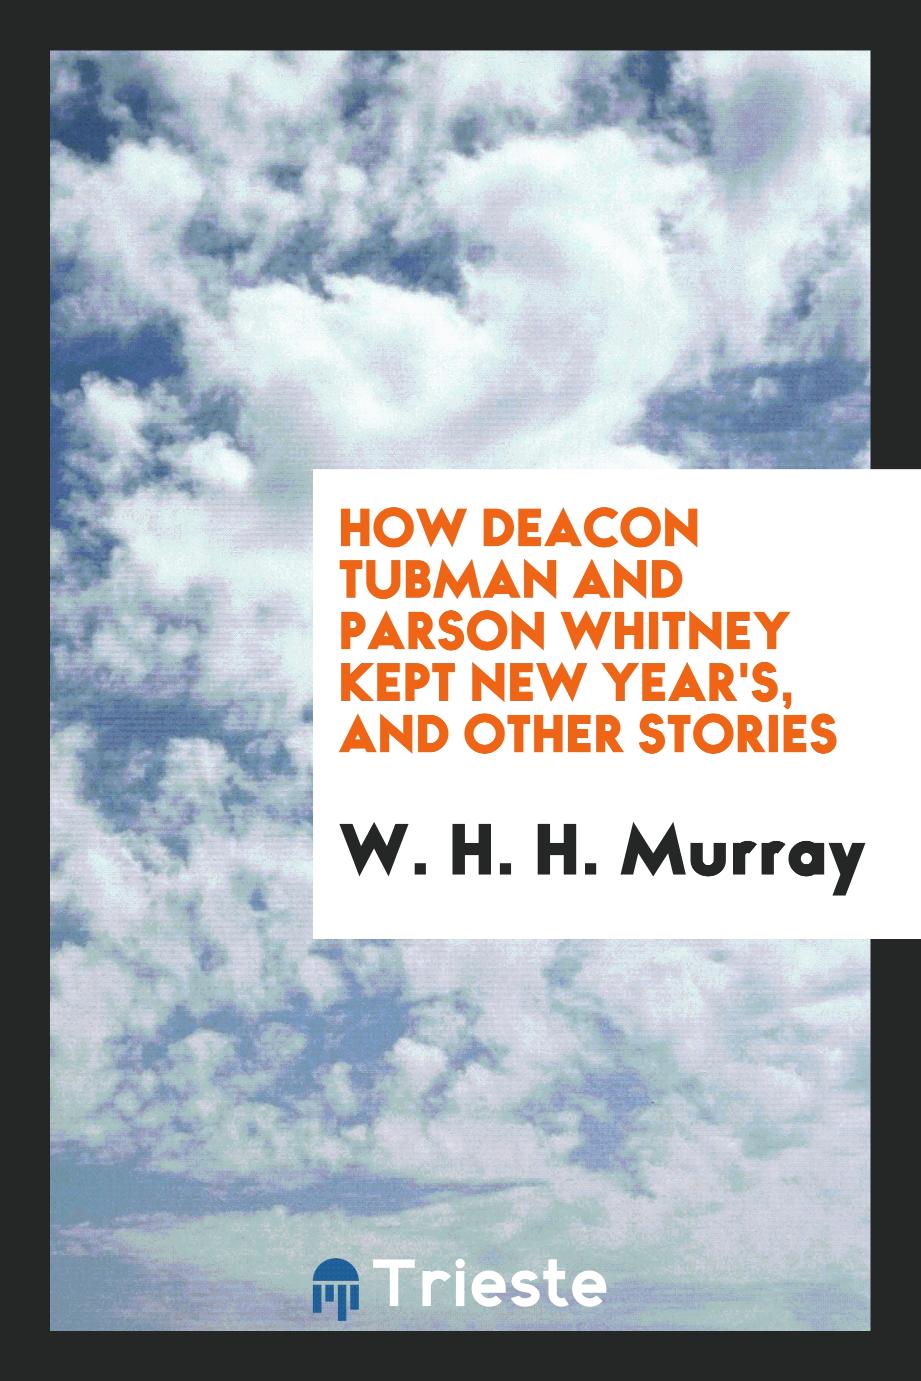 How Deacon Tubman and Parson Whitney kept New Year's, and other stories